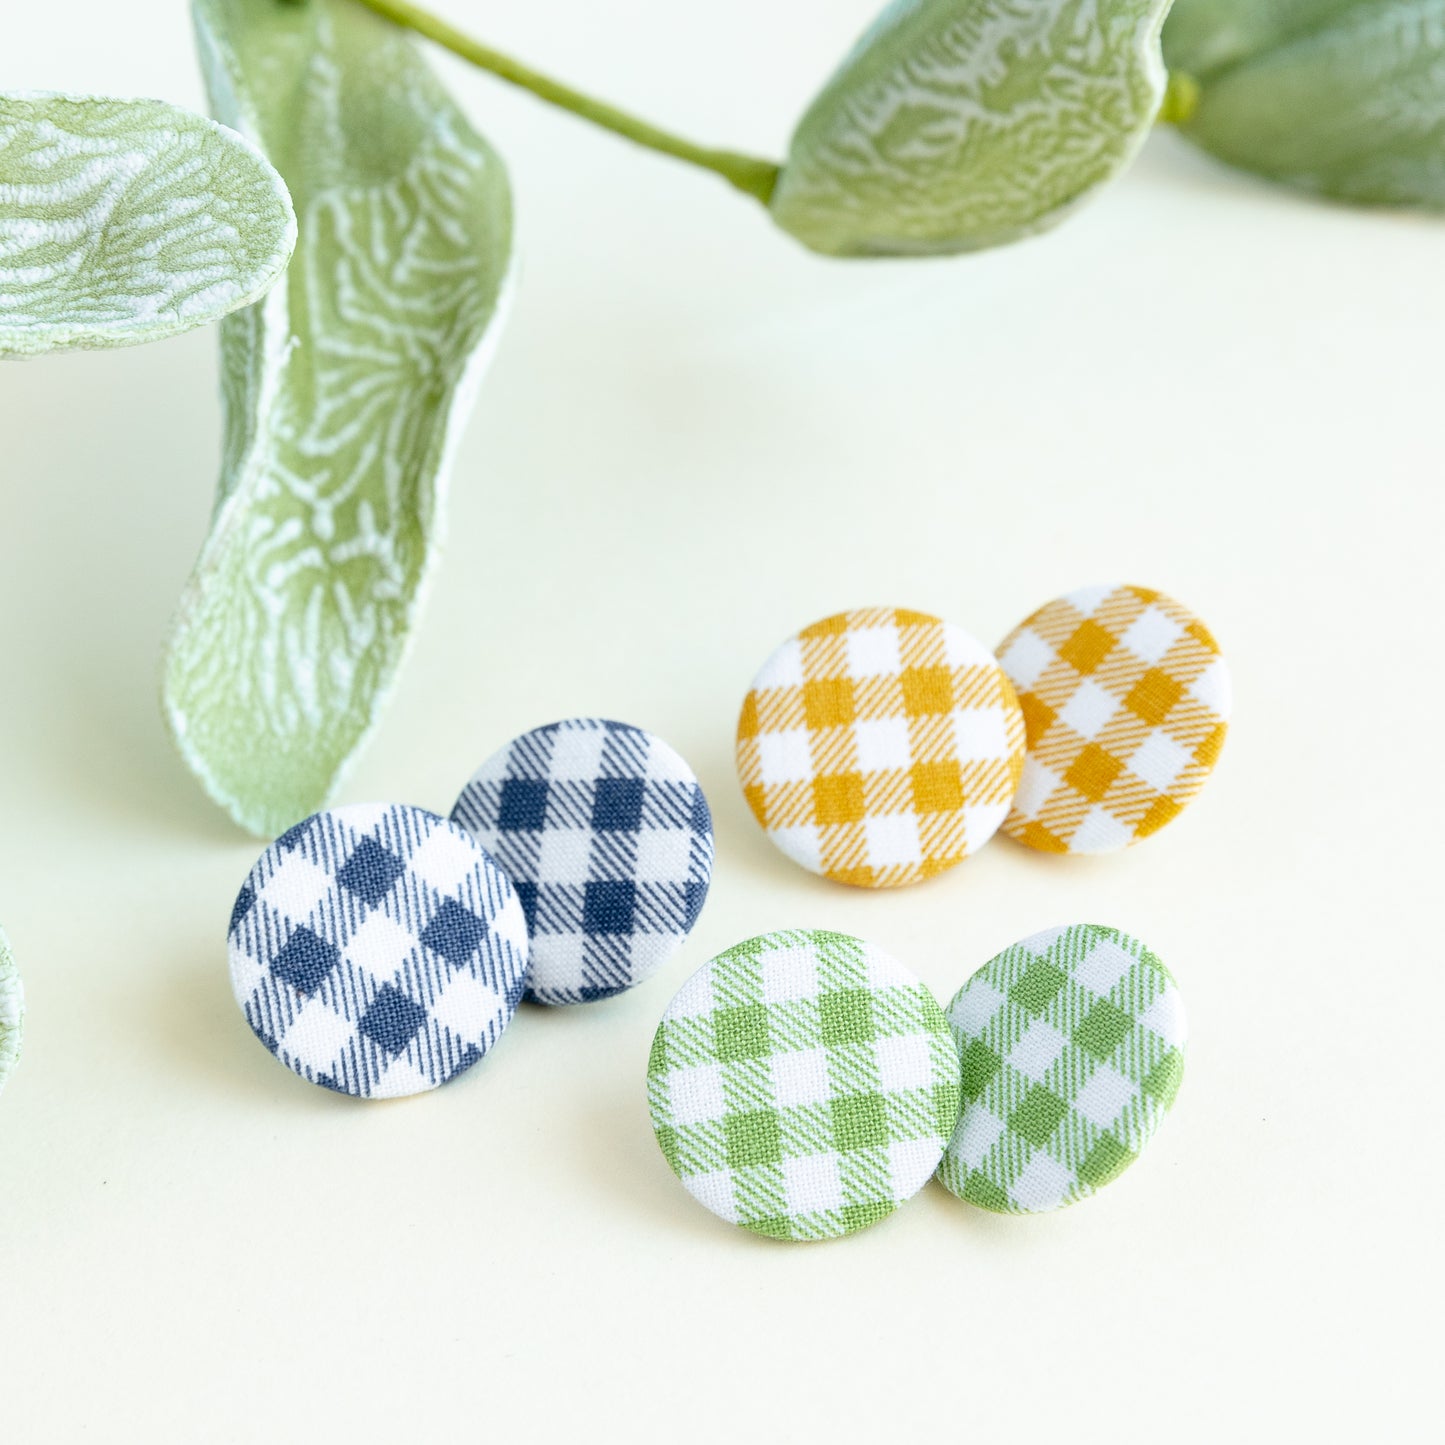 THE BUTTON in Gingham Plaid/ Retro Fabric Statement Earrings